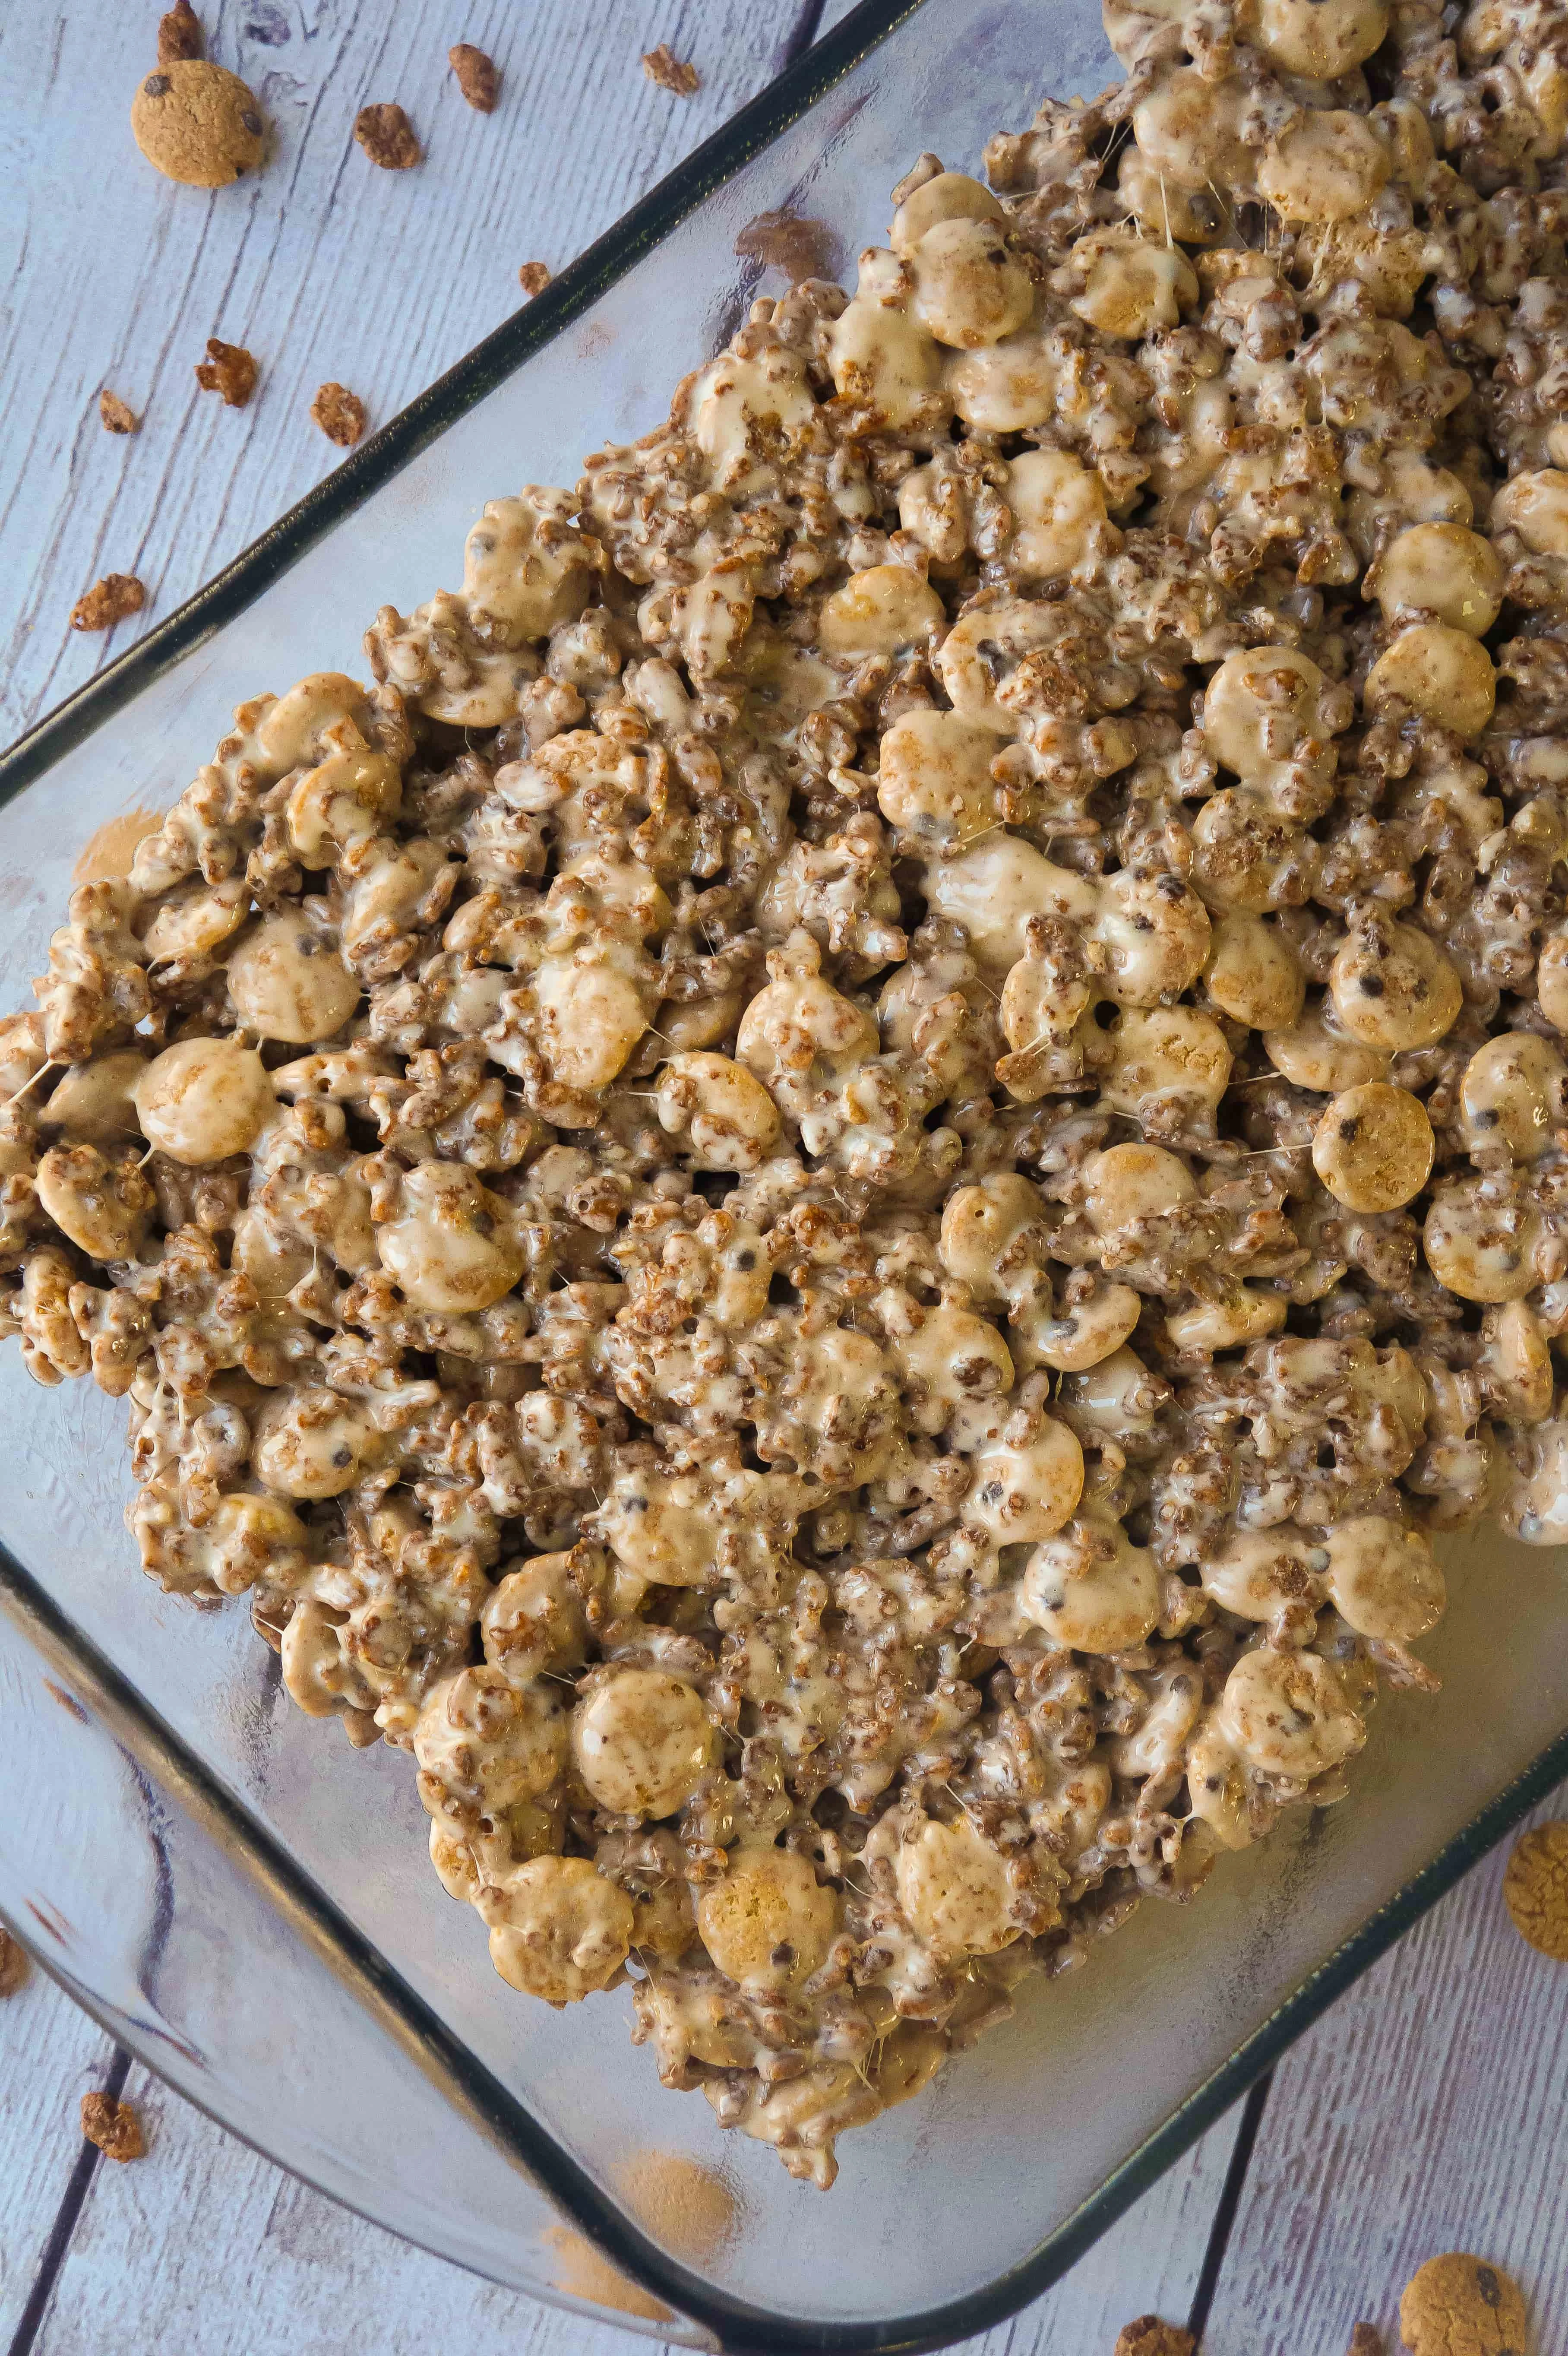 Chocolate Rice Krispie Treats with Cookie Crisp Cereal are a fun twist on classic rice krispie squares. These delicious marshmallow treats are made with Cocoa Rice Krispies and Cookie Crisp cereal.